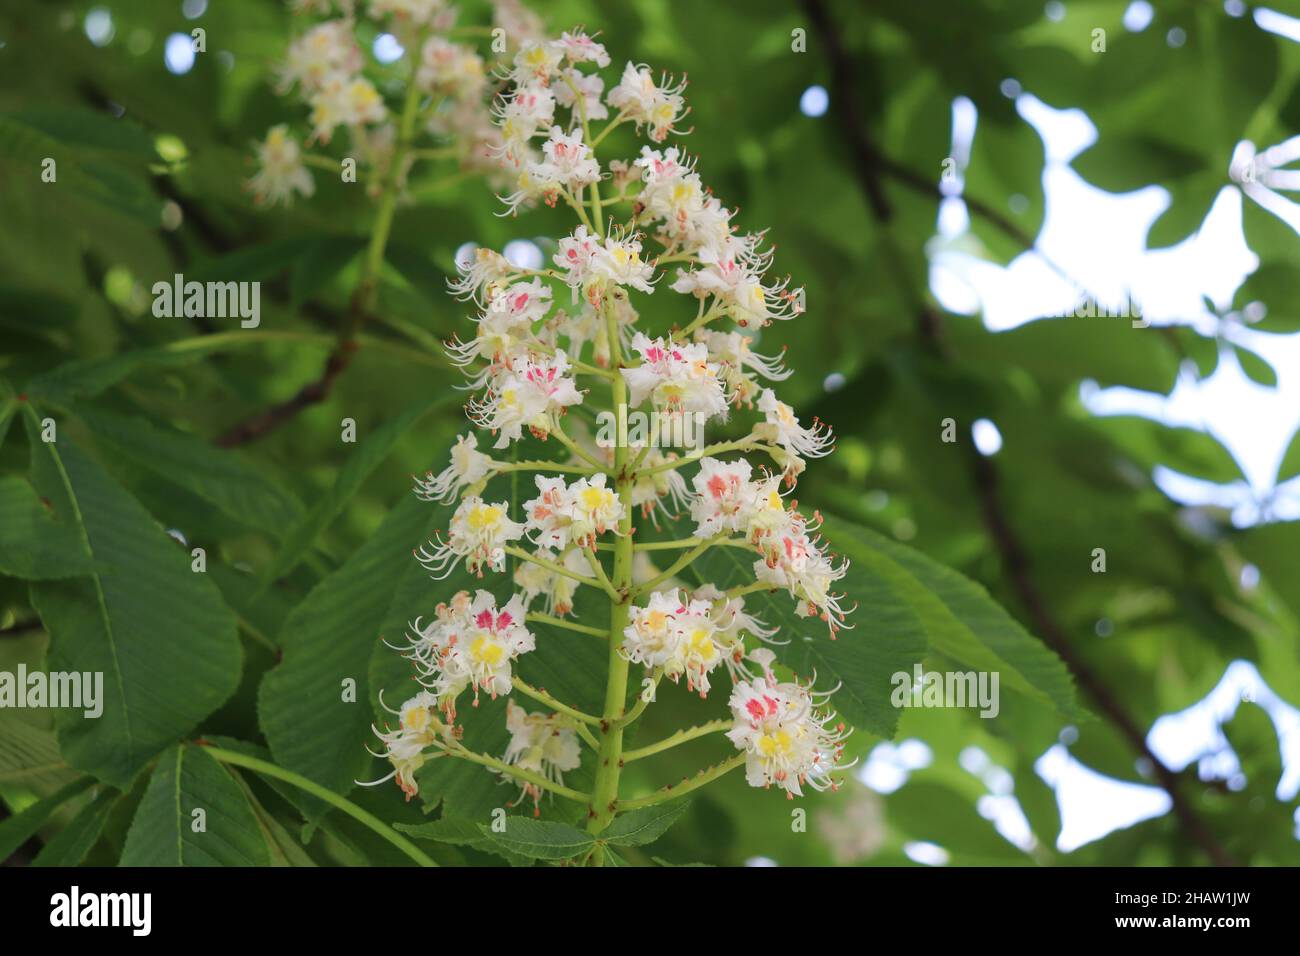 Closeup of aesculus turbinata growing in a garden with a blurry backgrou Stock Photo